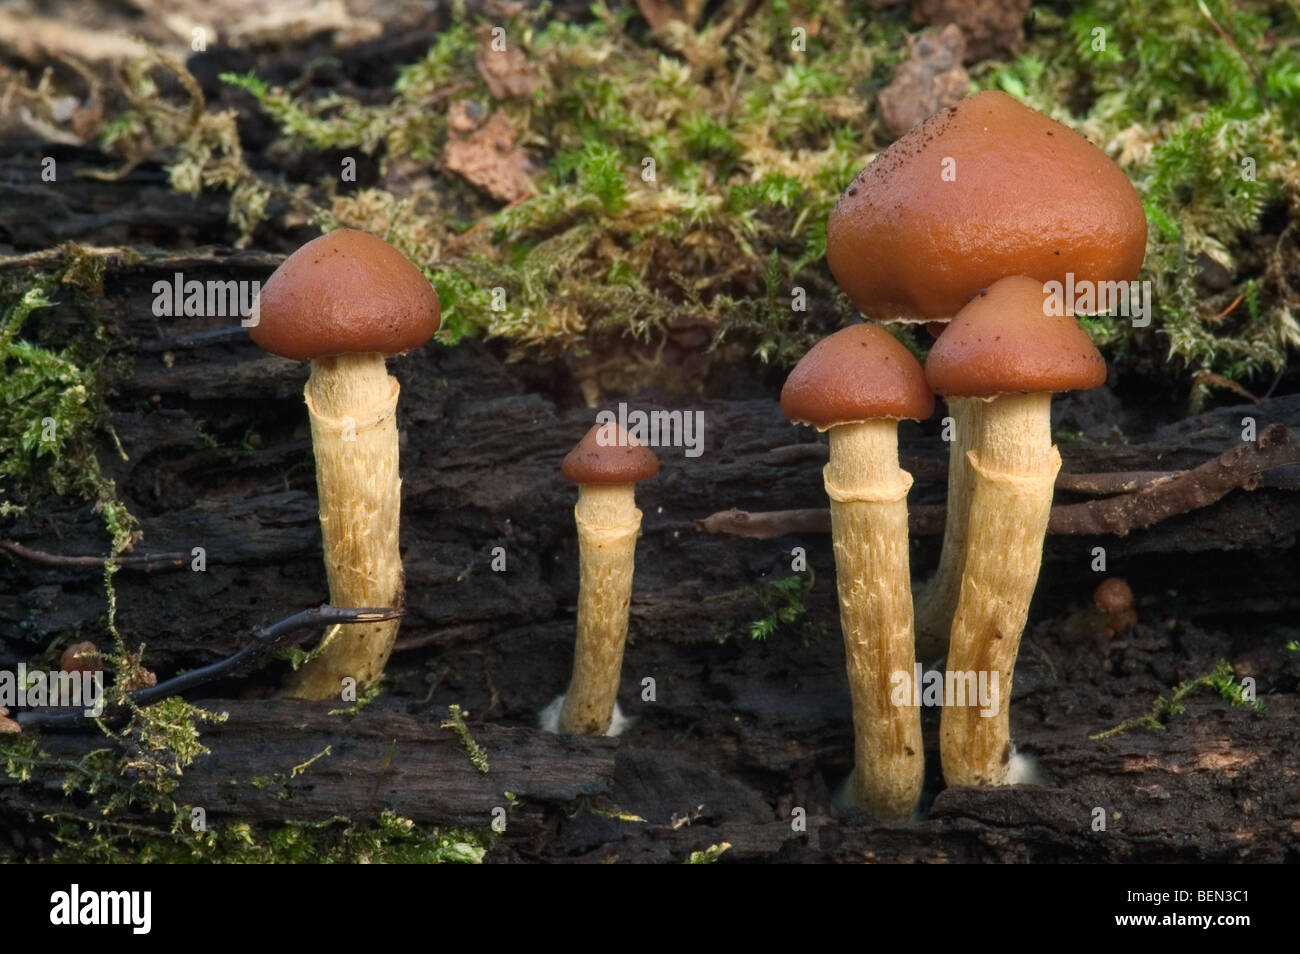 Luxuriant ringstalk / lacerated stropharia / conifer roundhead fungus (Stropharia hornemannii) on decaying wood Stock Photo